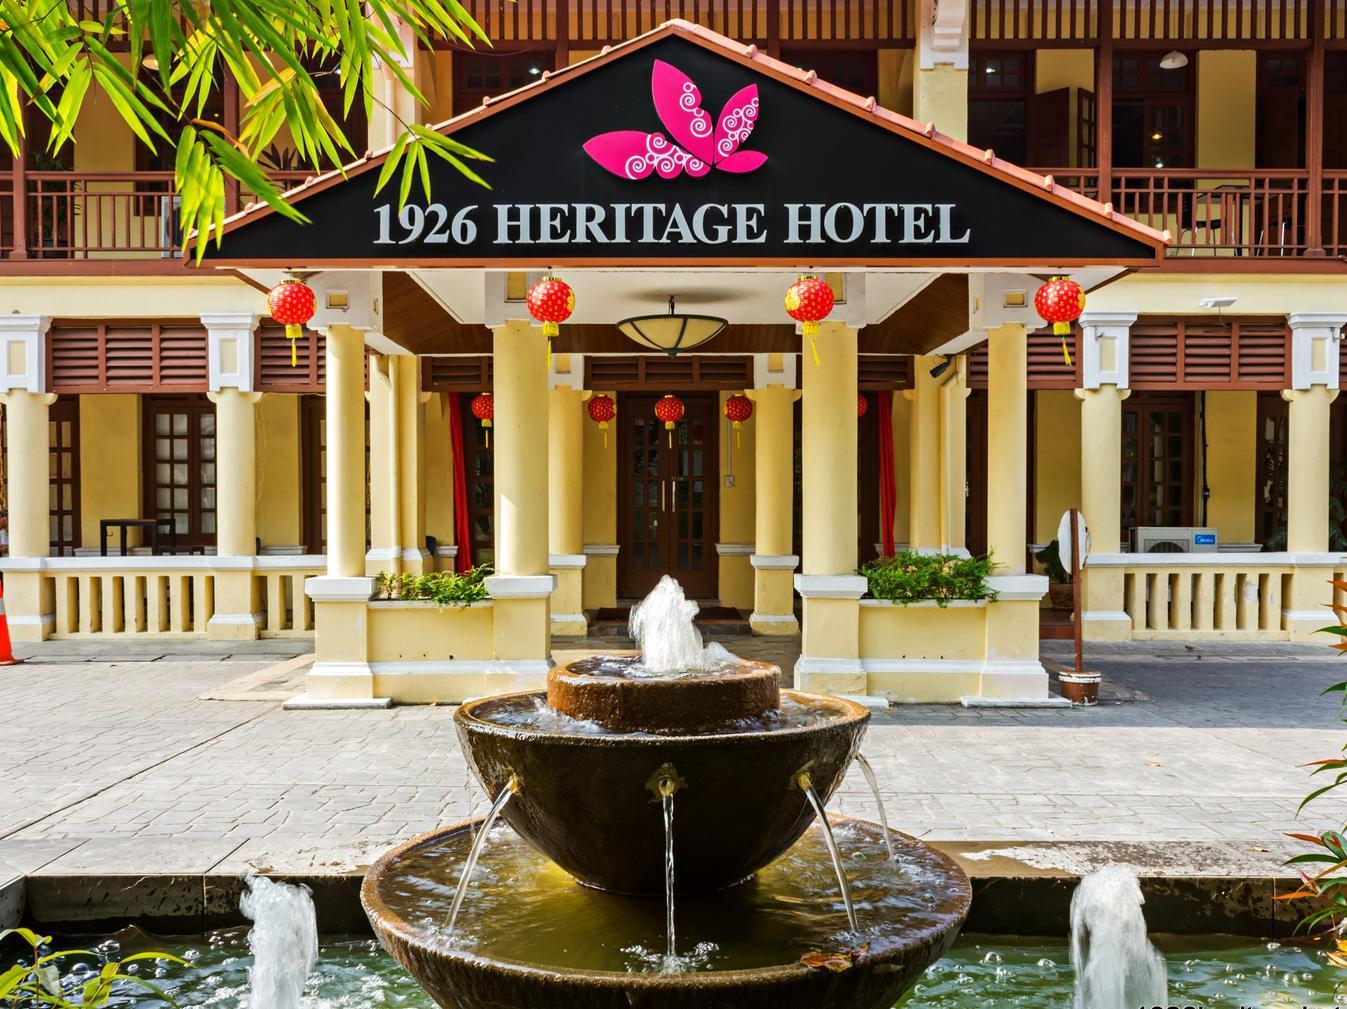 1926 Heritage Hotel Penang State FAQ 2017, What facilities are there in 1926 Heritage Hotel Penang State 2017, What Languages Spoken are Supported in 1926 Heritage Hotel Penang State 2017, Which payment cards are accepted in 1926 Heritage Hotel Penang State , Penang State 1926 Heritage Hotel room facilities and services Q&A 2017, Penang State 1926 Heritage Hotel online booking services 2017, Penang State 1926 Heritage Hotel address 2017, Penang State 1926 Heritage Hotel telephone number 2017,Penang State 1926 Heritage Hotel map 2017, Penang State 1926 Heritage Hotel traffic guide 2017, how to go Penang State 1926 Heritage Hotel, Penang State 1926 Heritage Hotel booking online 2017, Penang State 1926 Heritage Hotel room types 2017.